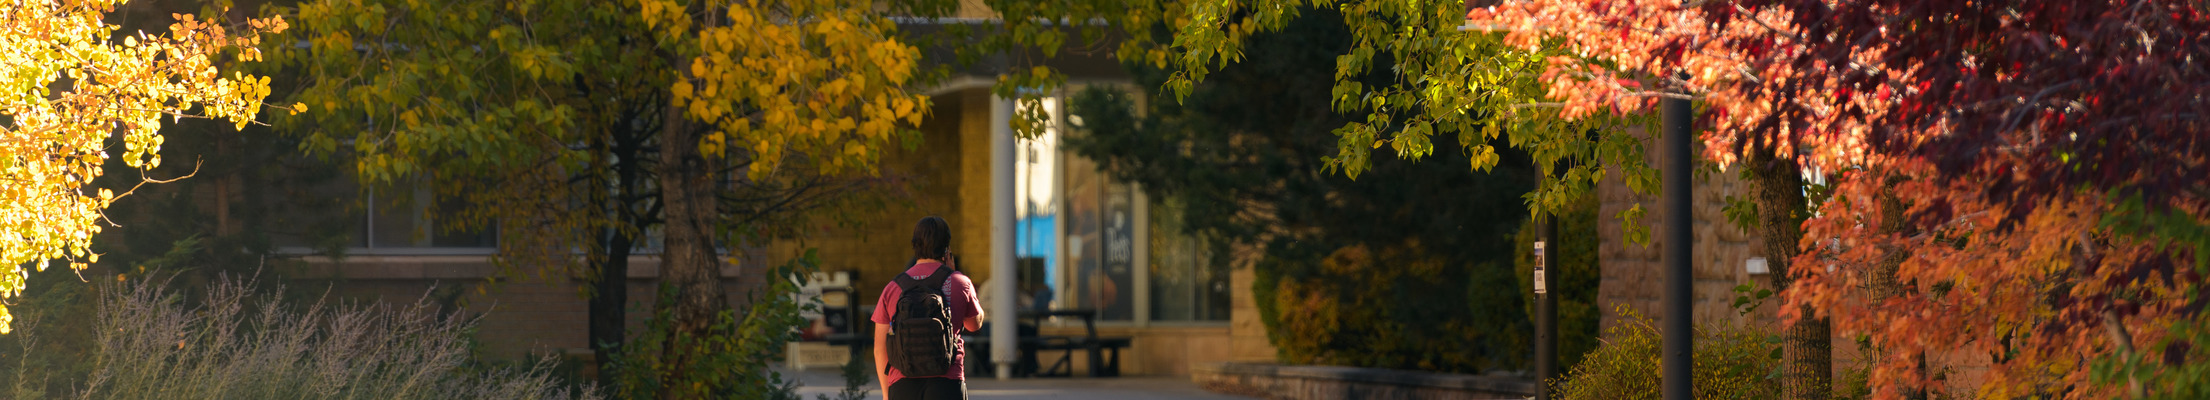 A student outside on campus.